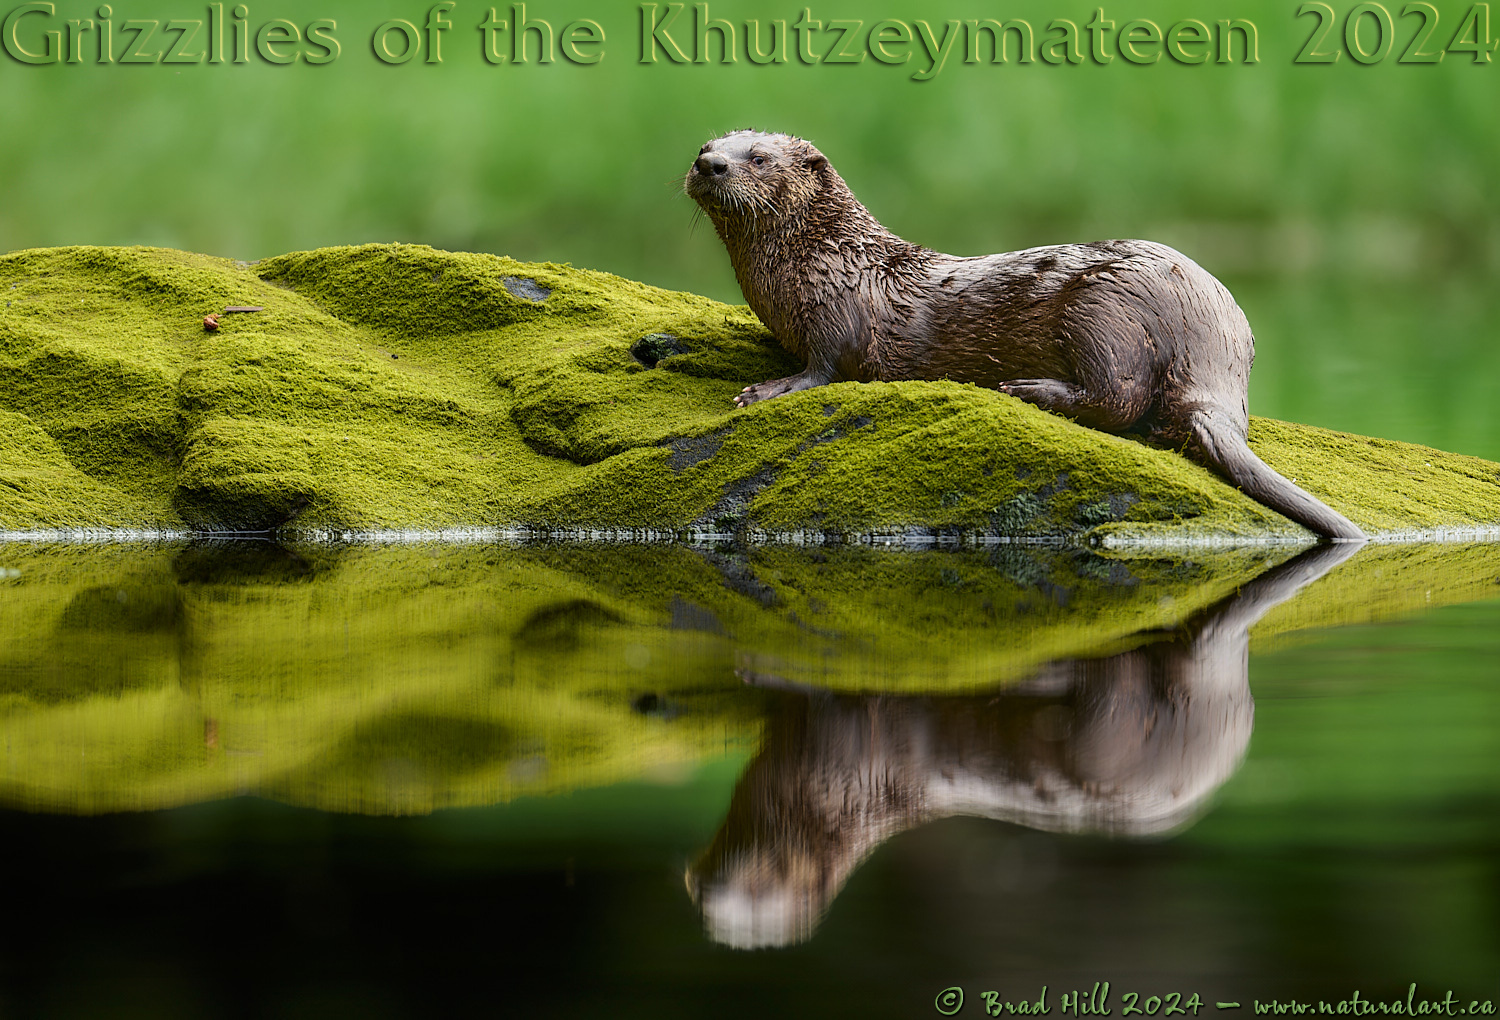 Wary - Northern River Otter